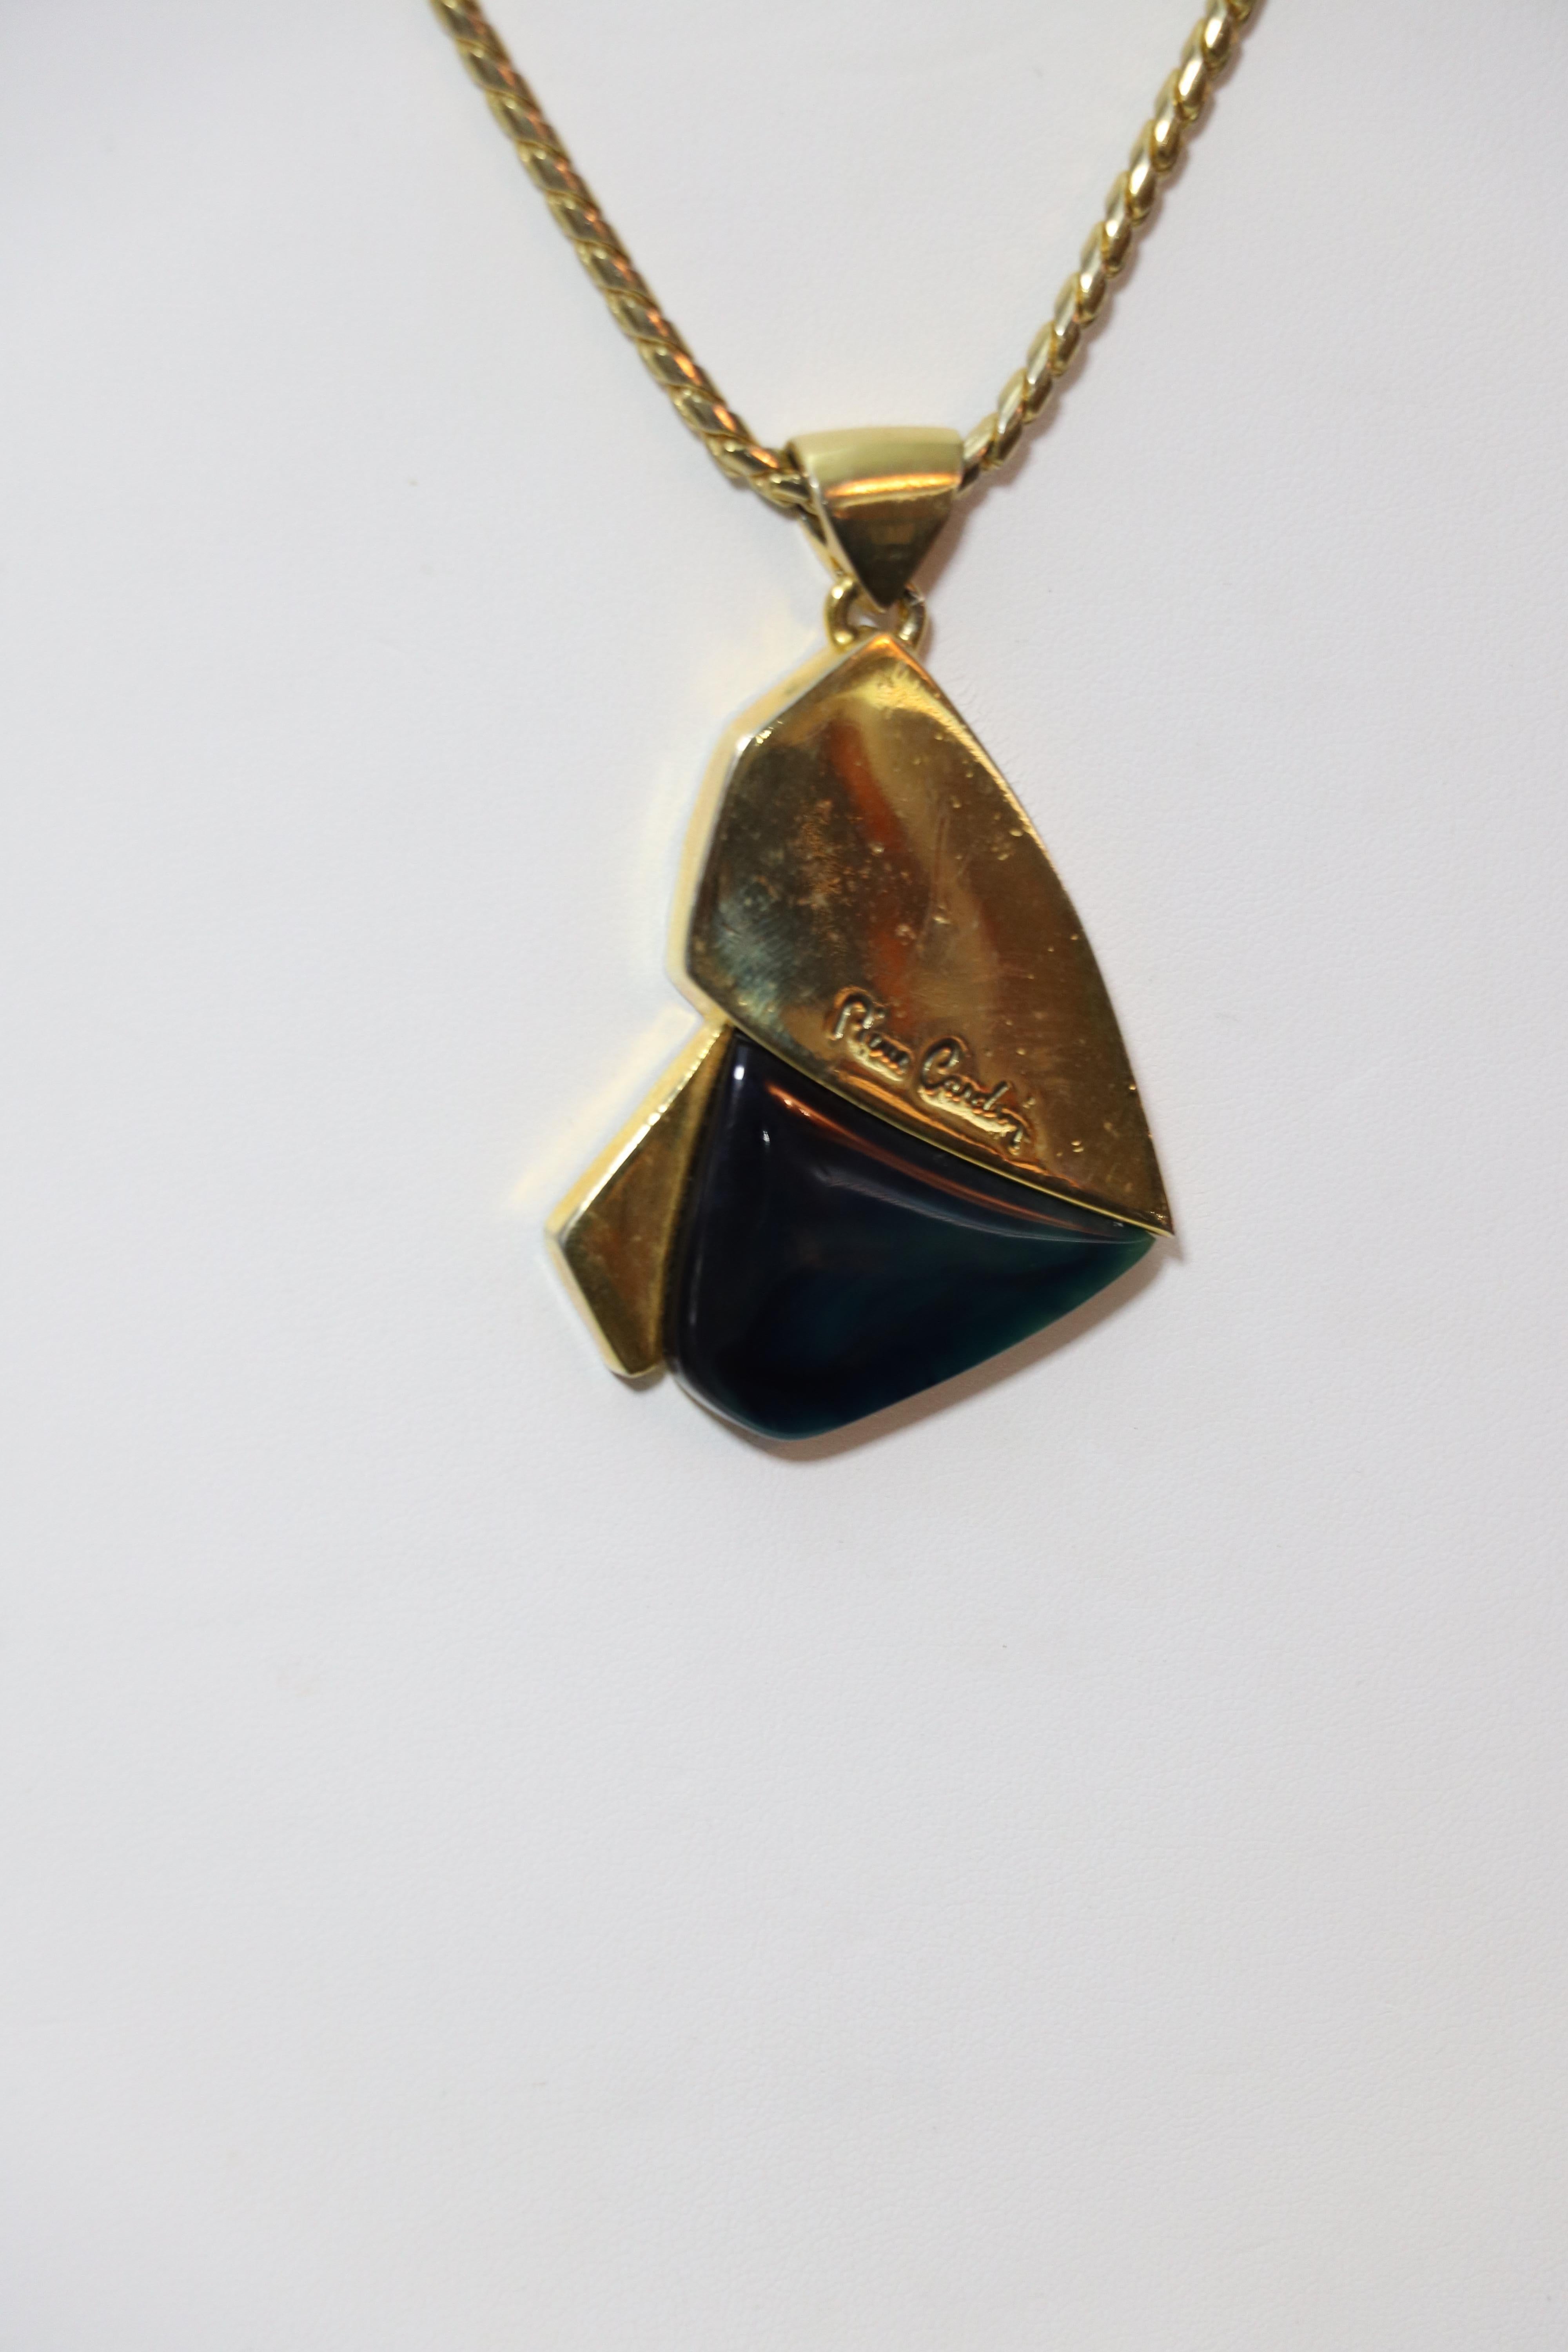 Pierre Cardin Vintage 1970's Modernist Necklace In Good Condition For Sale In Carmel, CA